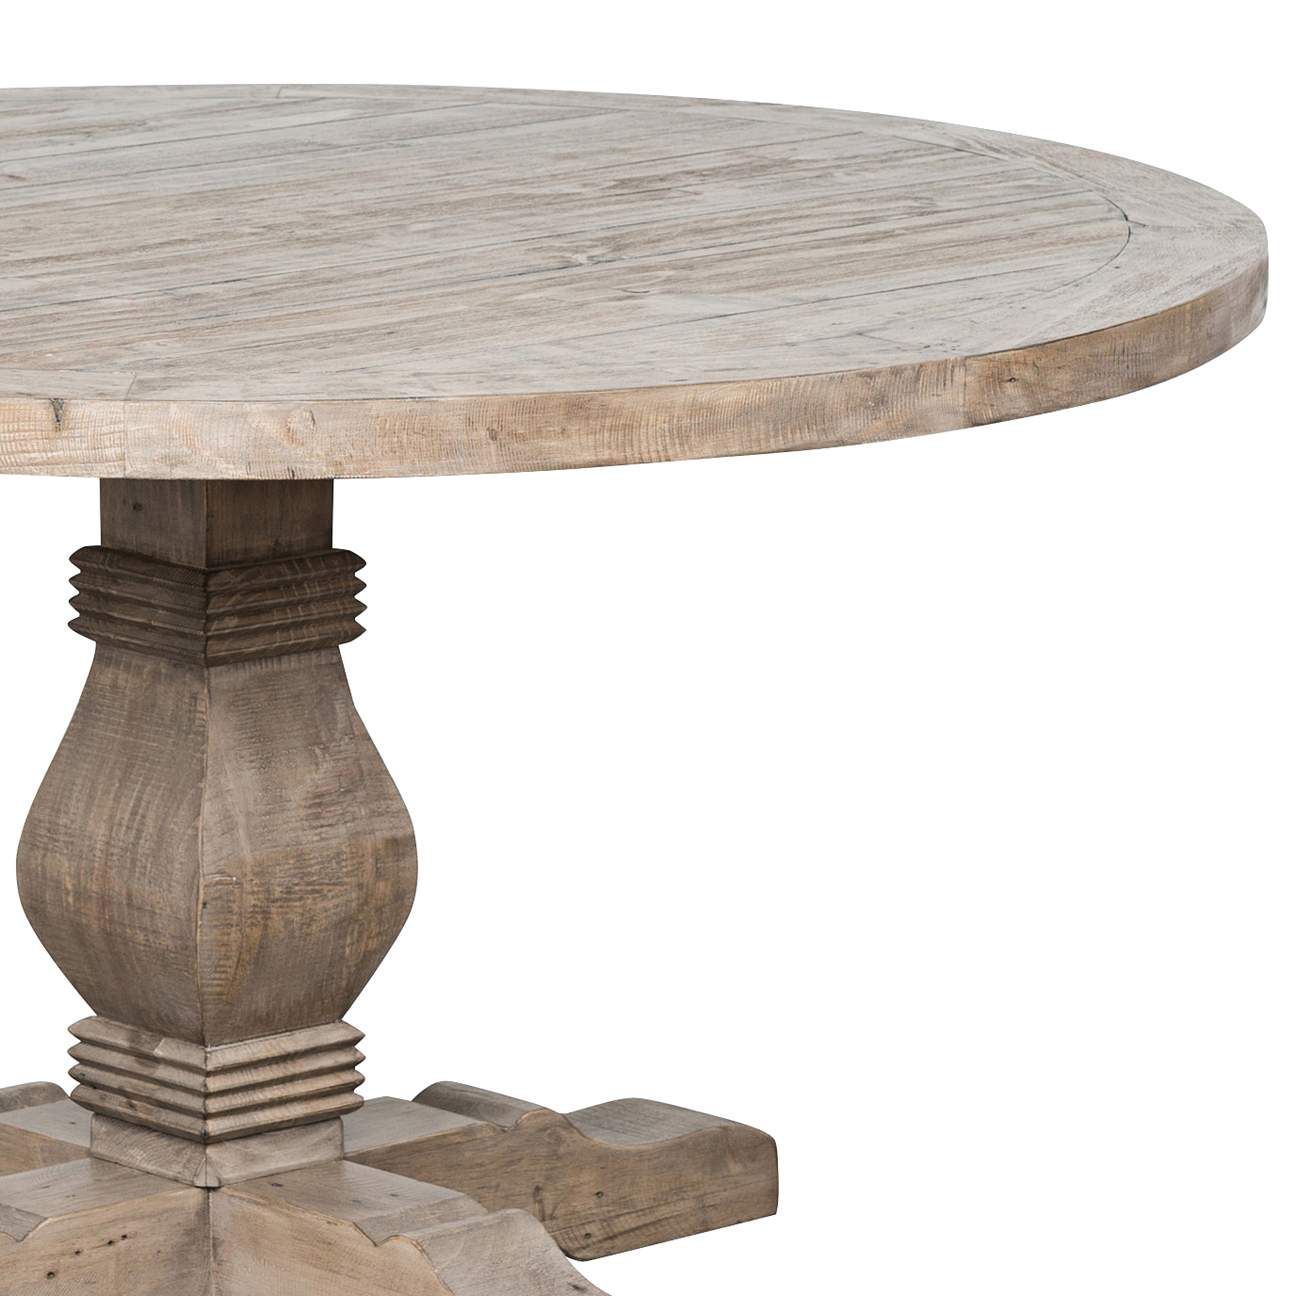 Caleb 55" Wide Reclaimed Desert Wood Round Dining Table | Lamps Plus